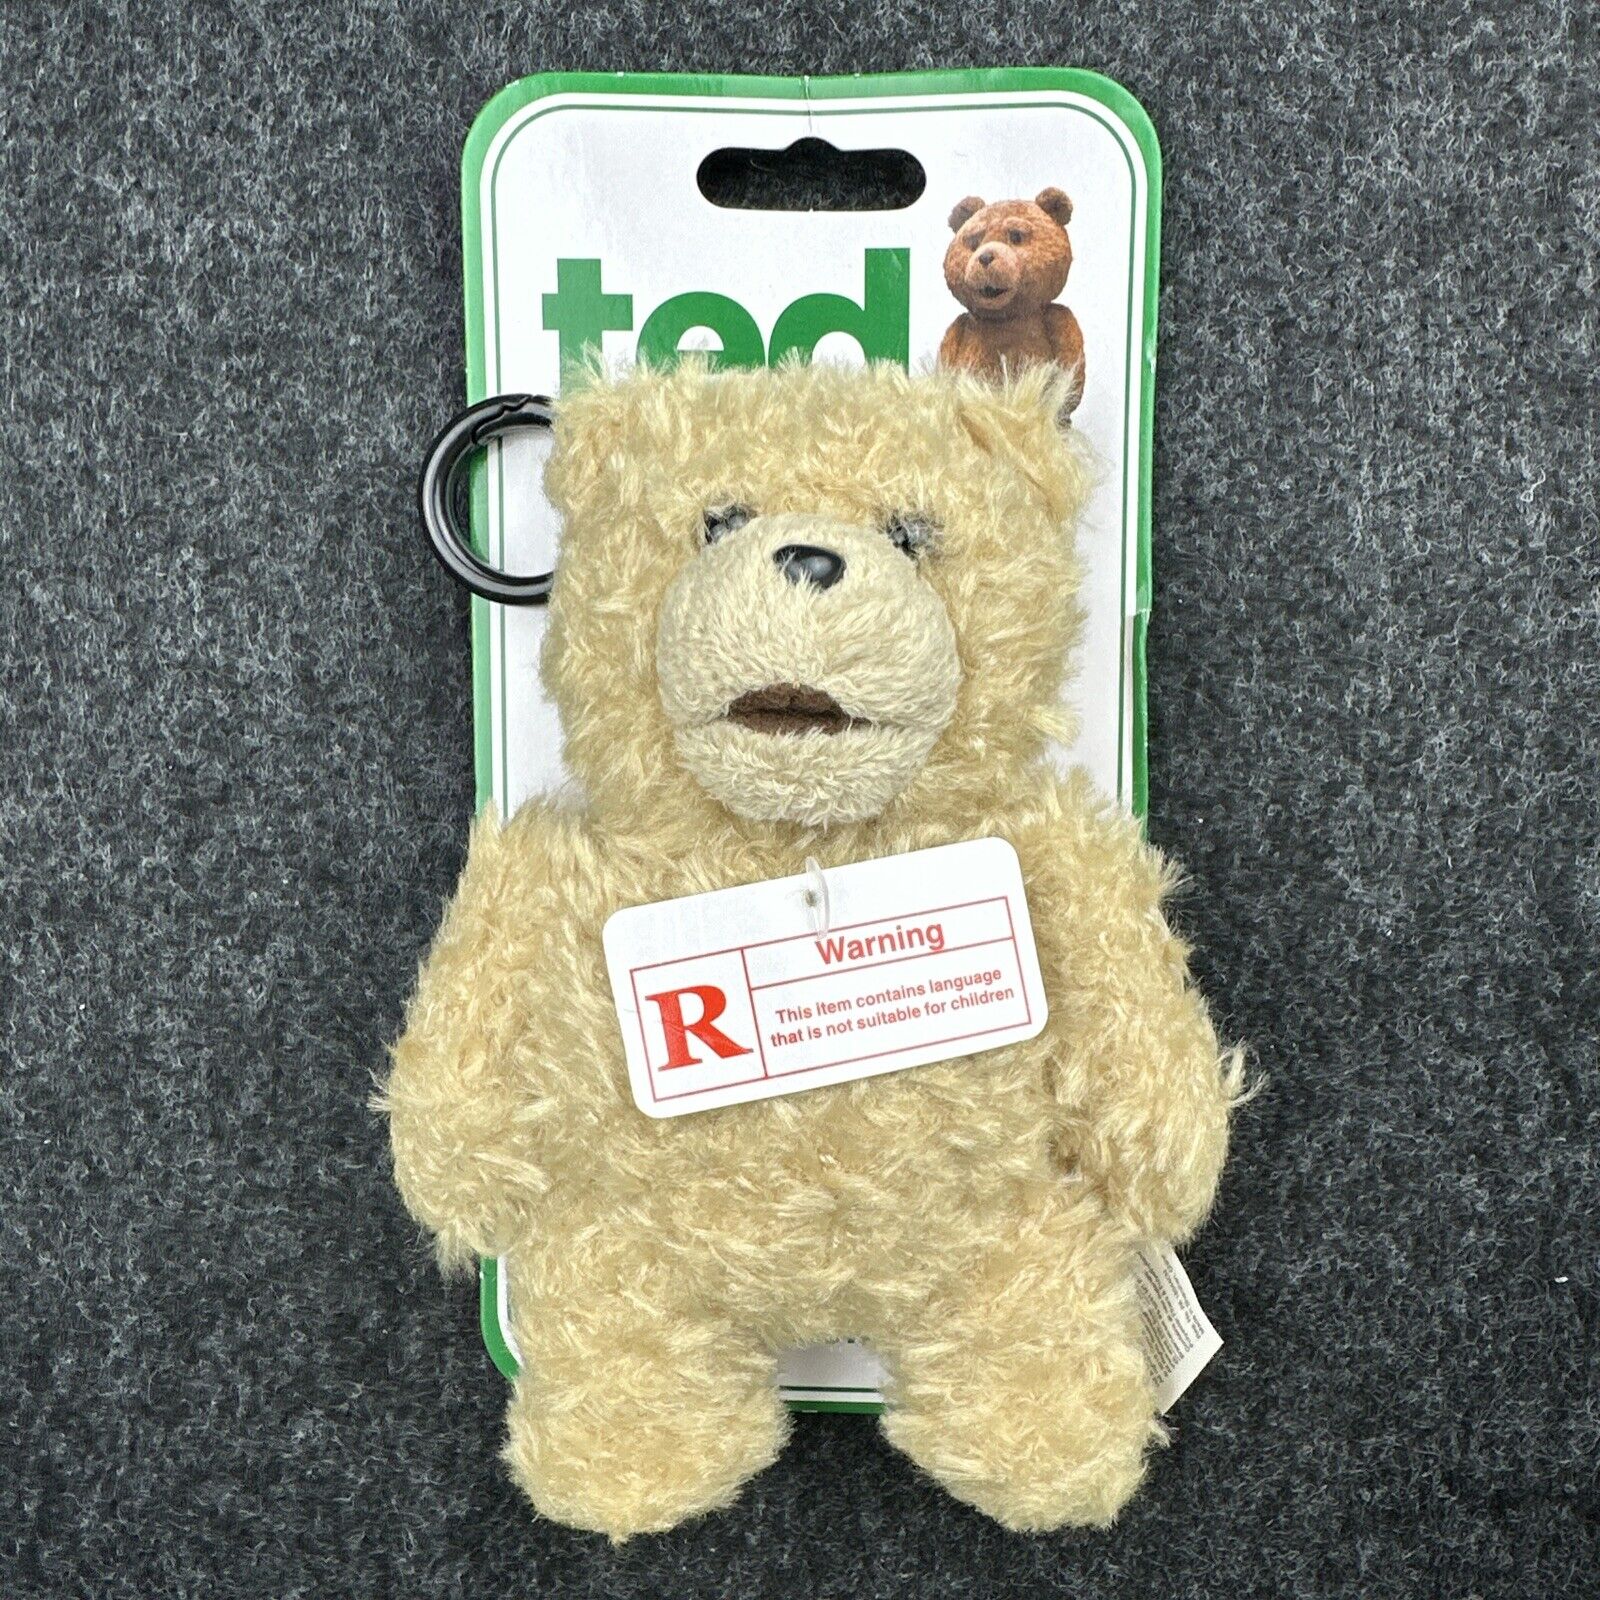 Commonwealth Toys 6" Talking Ted Movie Doll  R Rated  New With Tags Vintage 2012